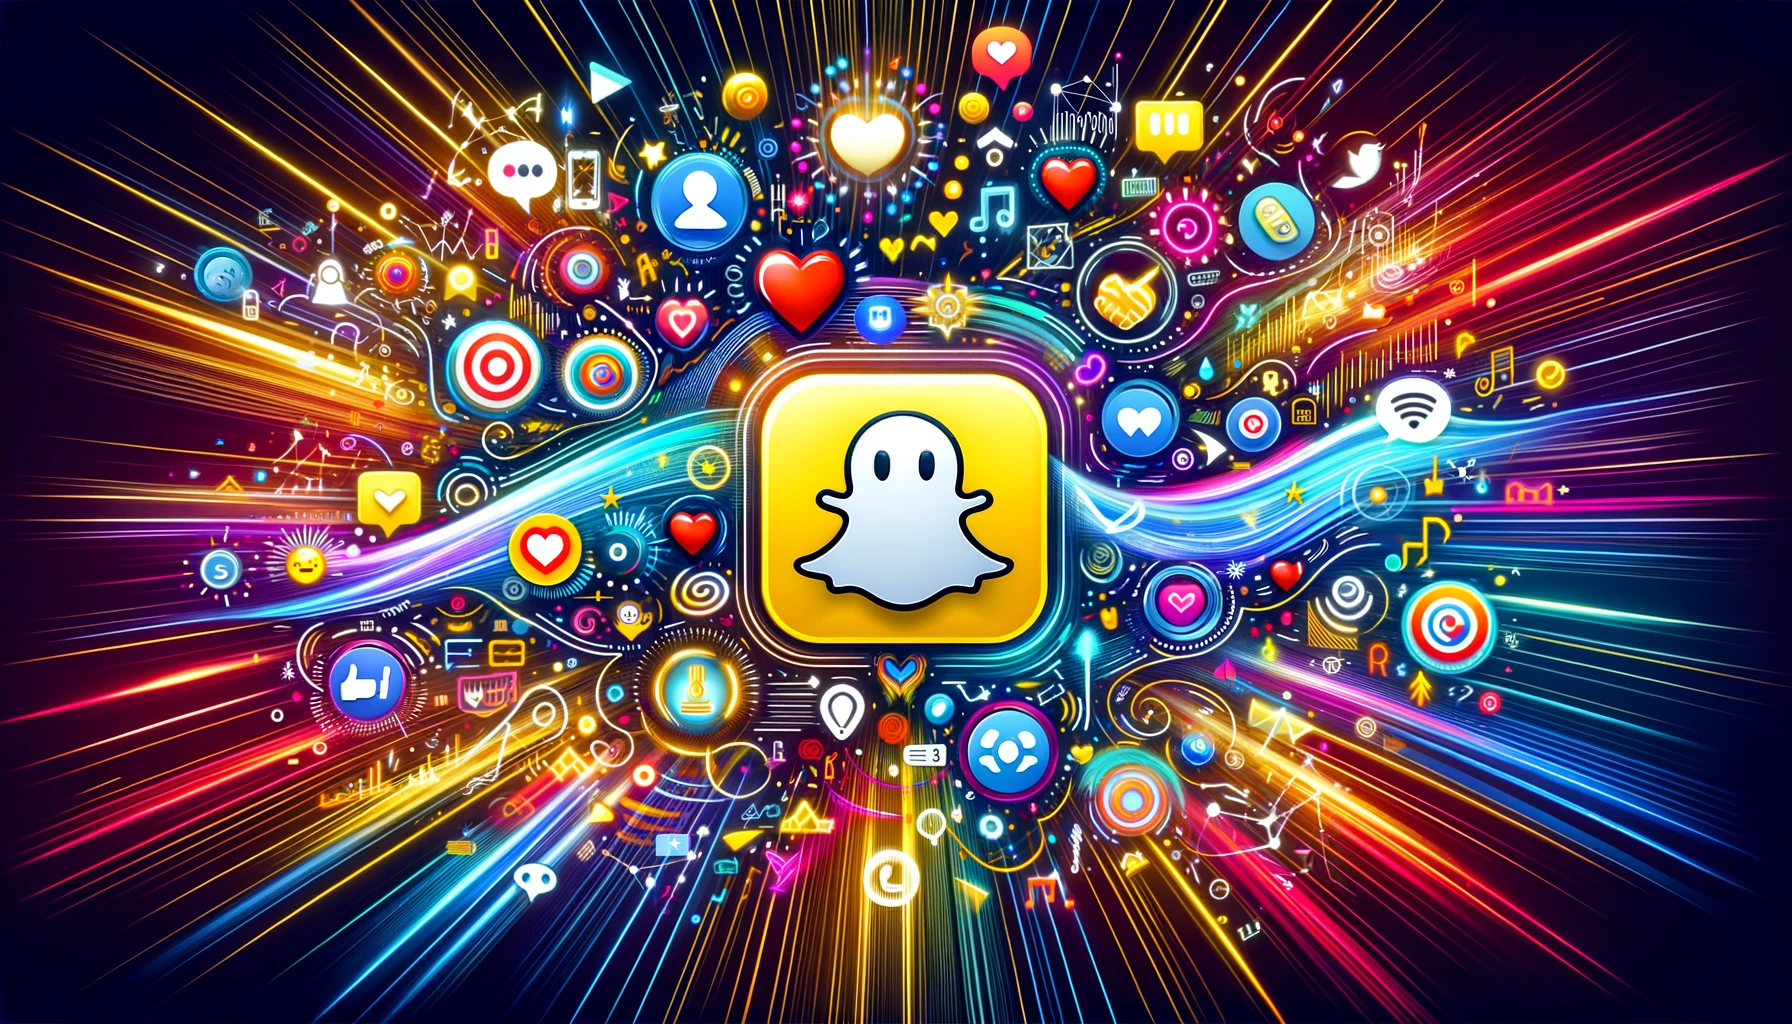 Symbolic representation of Snapchat Ad Engagement with abstract social interaction icons and engagement metrics surrounding a vibrant Snapchat ghost symbol.